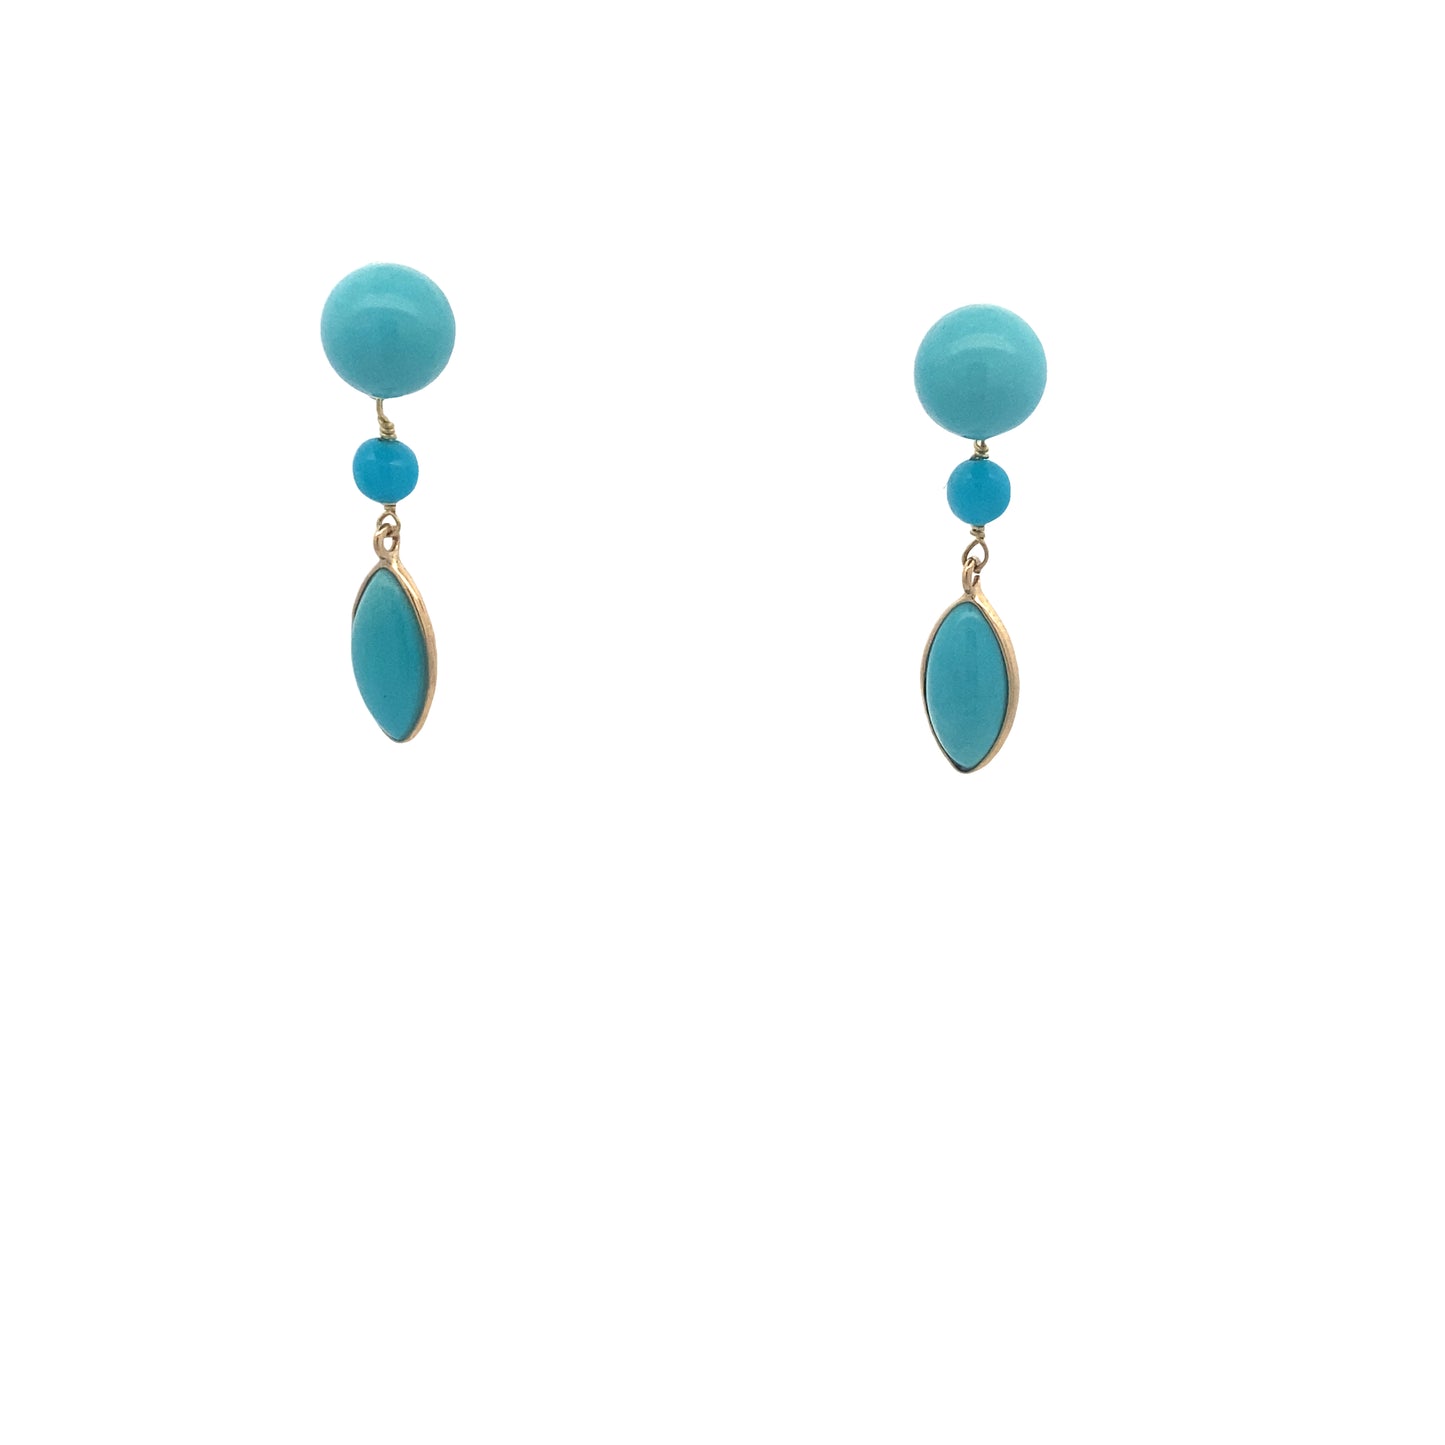 18K Gold Turquoise Earrings | Rajola Italy | Luby 